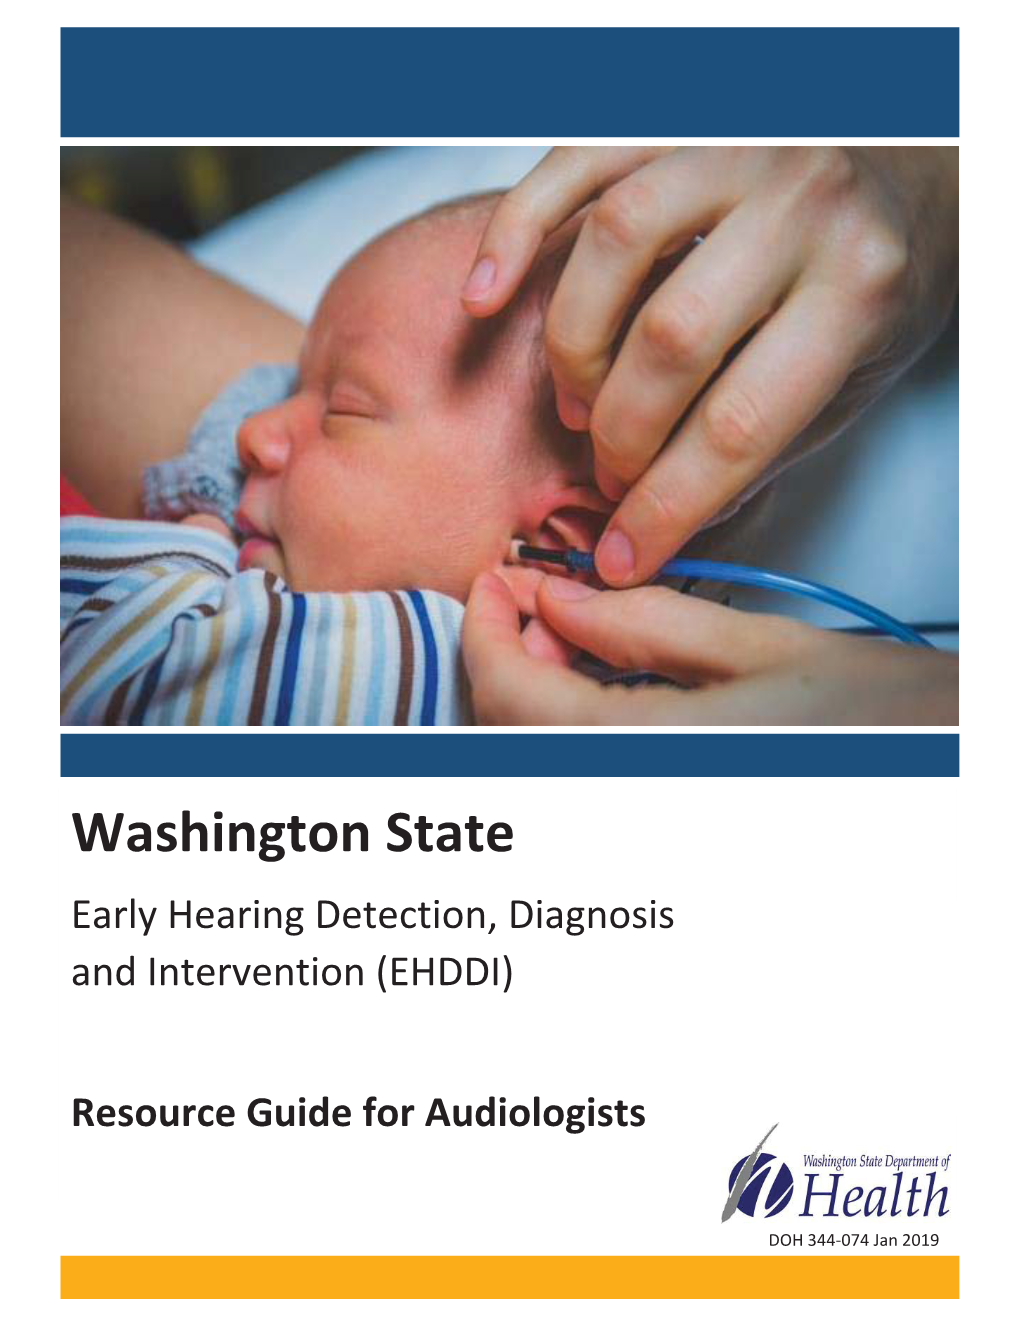 (EHDDI) Resource Guide for Audiologists